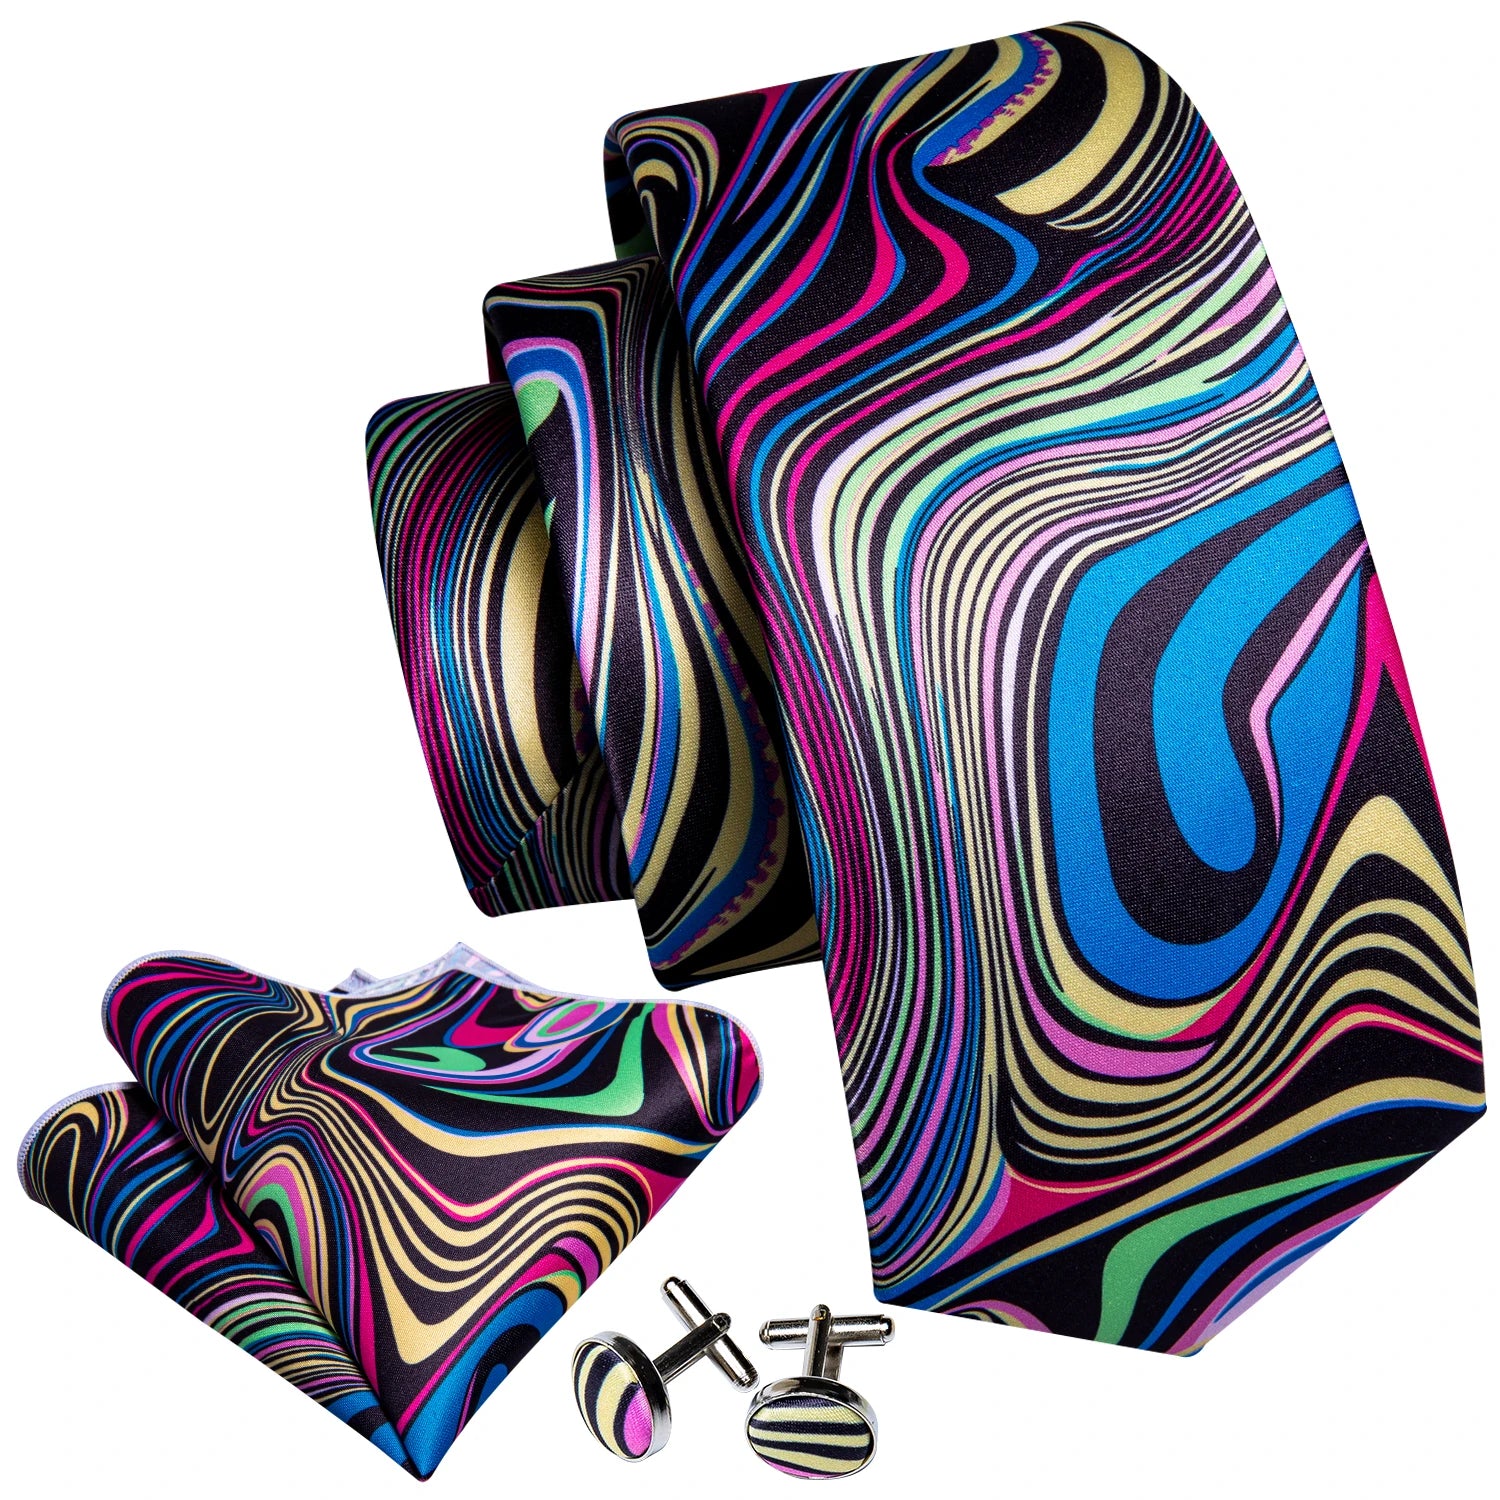 Luxury Barry.Wang Modern Abstract Multicolor Design Necktie with Pocket Square and Cufflinks Set